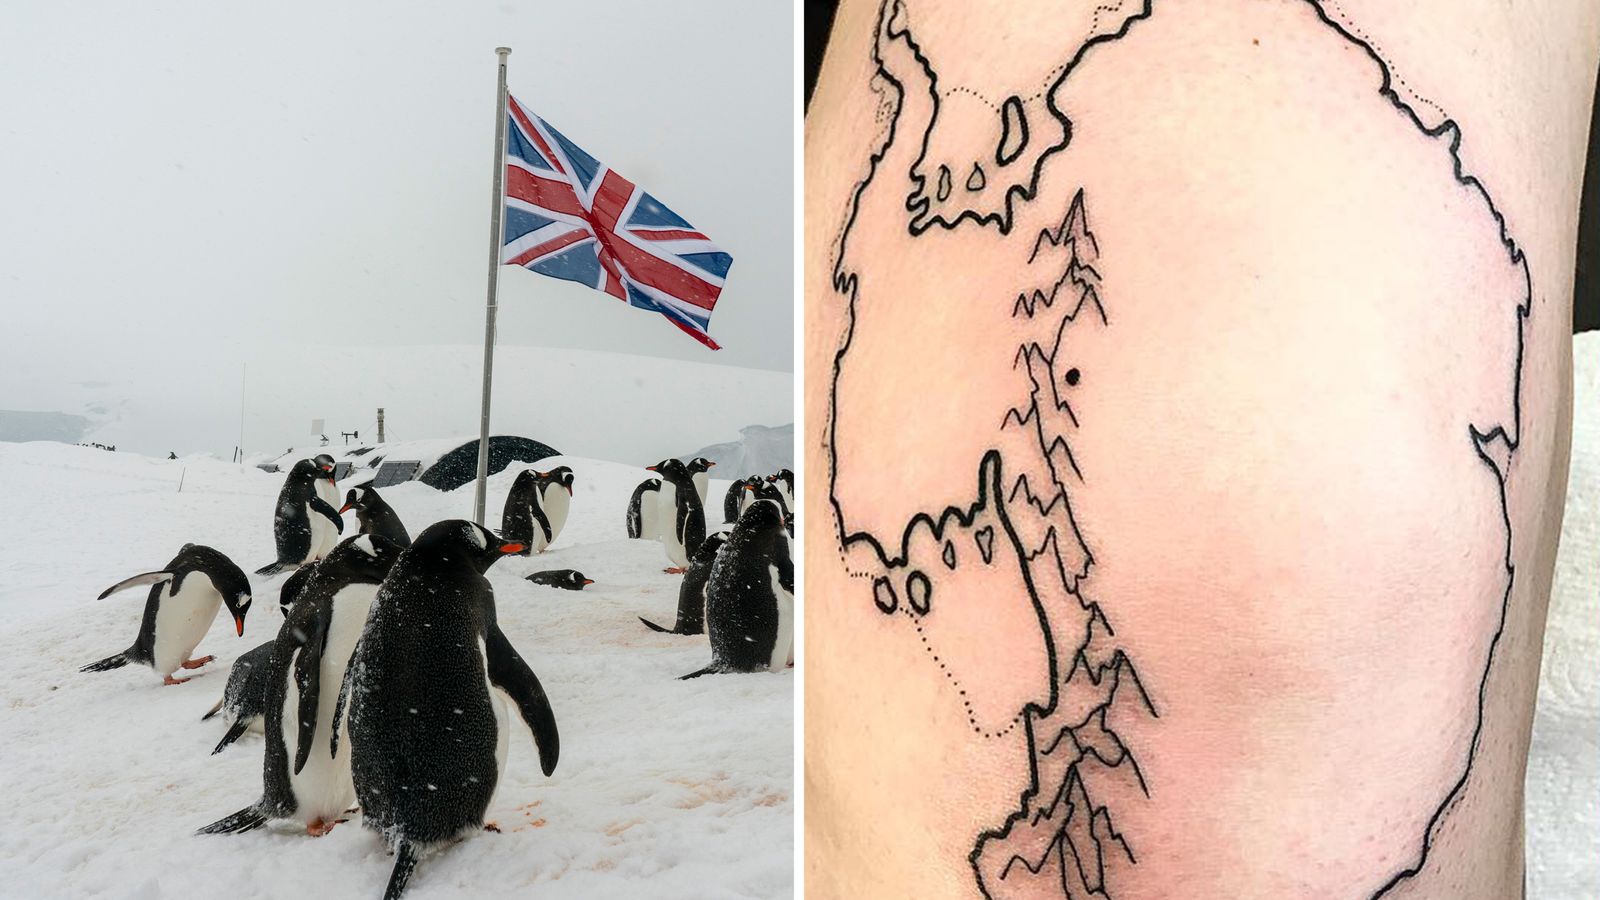 Applications open for Antarctica's penguin post office with one applicant using tattoos to show her enthusiam